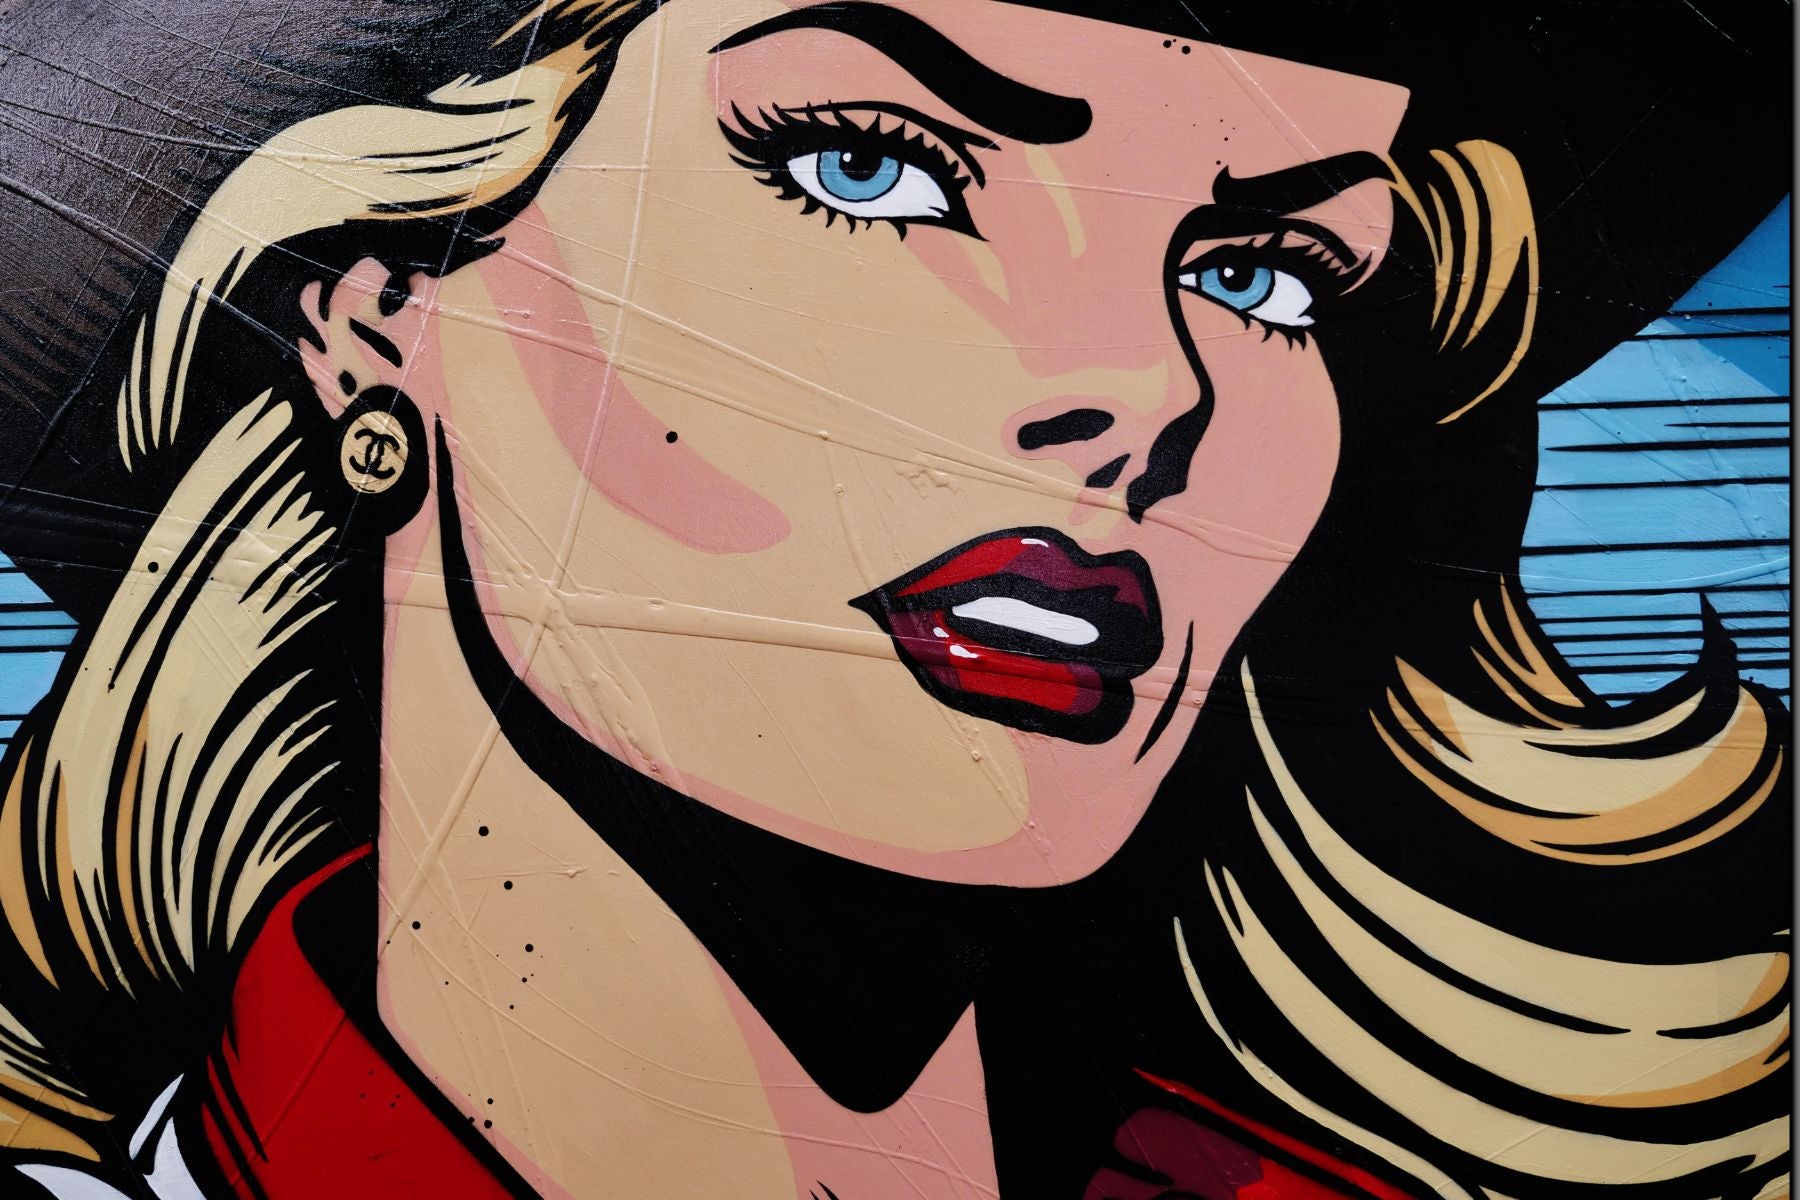 Dead or Alive 190cm x 100cm Cowgirl Textured Urban Pop Art Painting (SOLD)